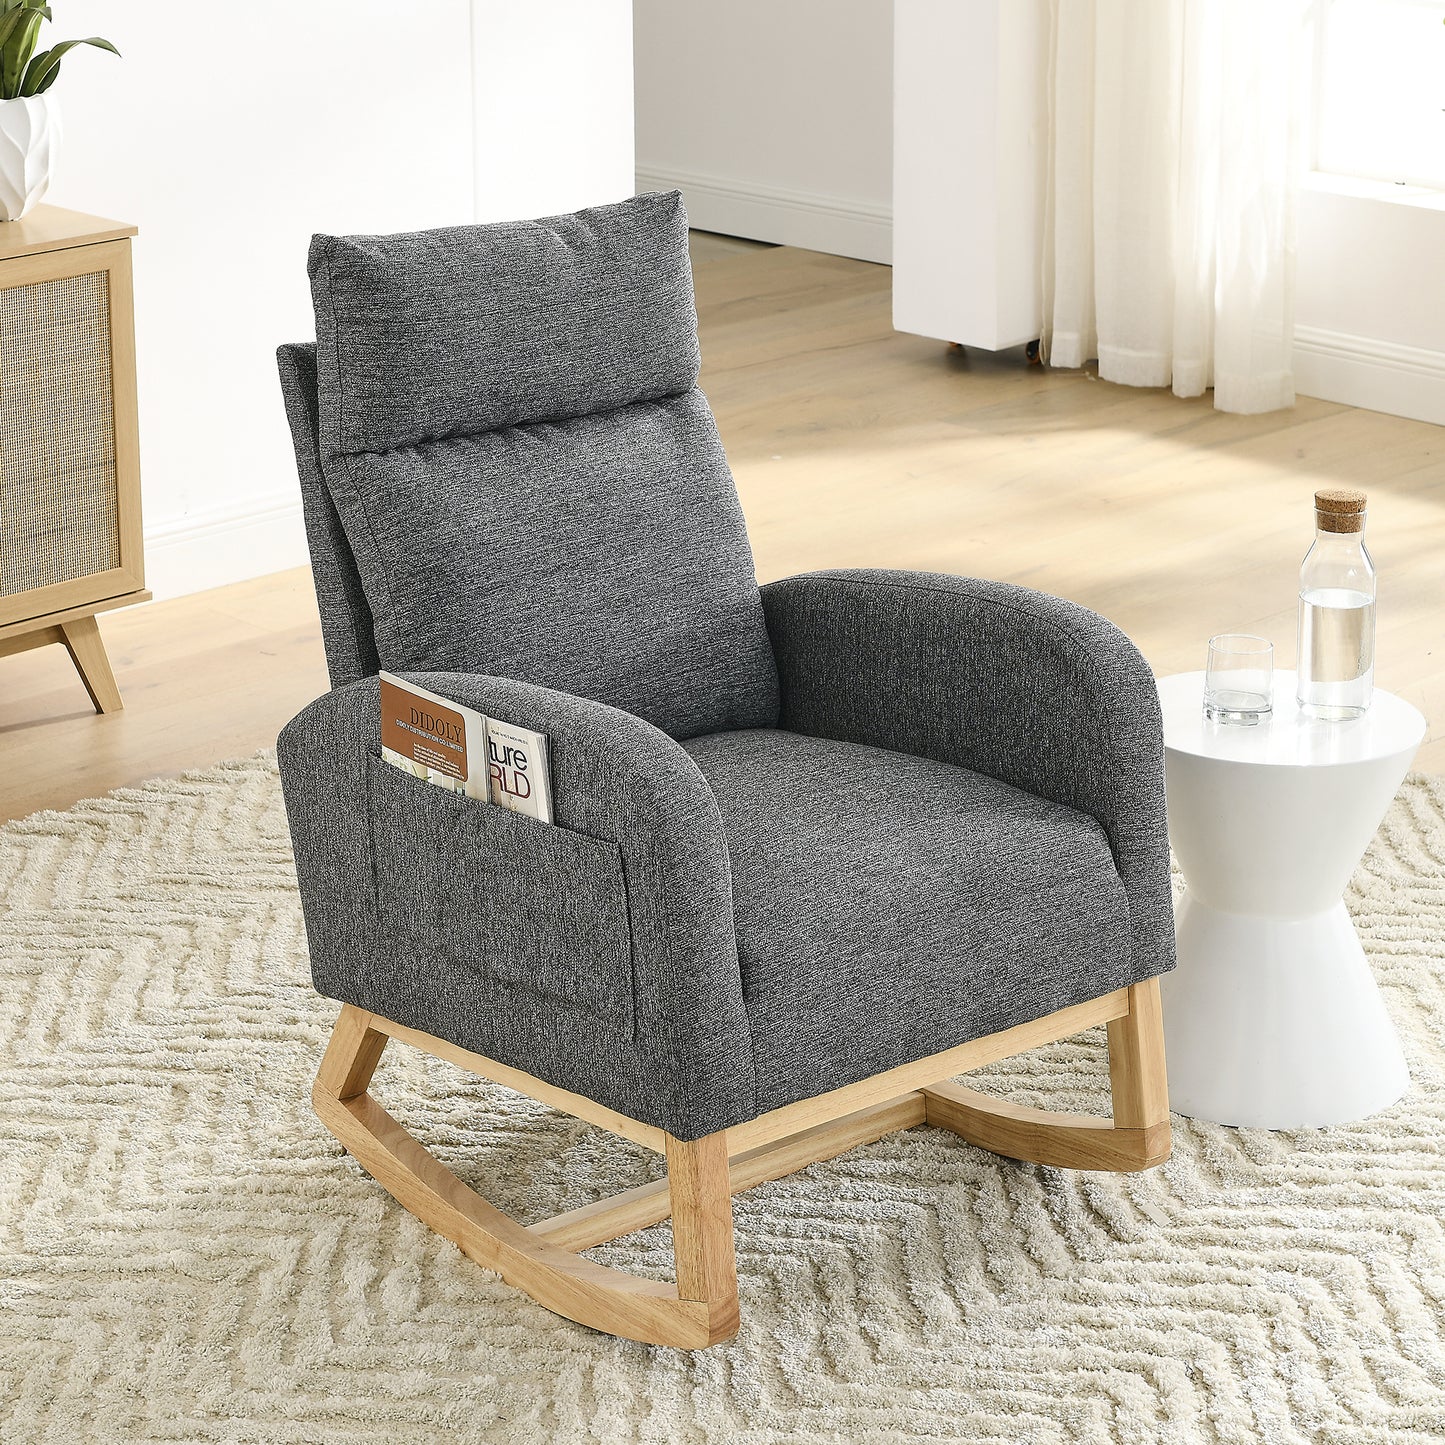 SYNGAR Rocking Chair, Upholstered Fabric Nursery Chair, Nursery Glider with High Back and 2 Side Pockets, Rocking Chairs with Wood Curved Base, Glider Chair for Nursery, Living Room, Home Office